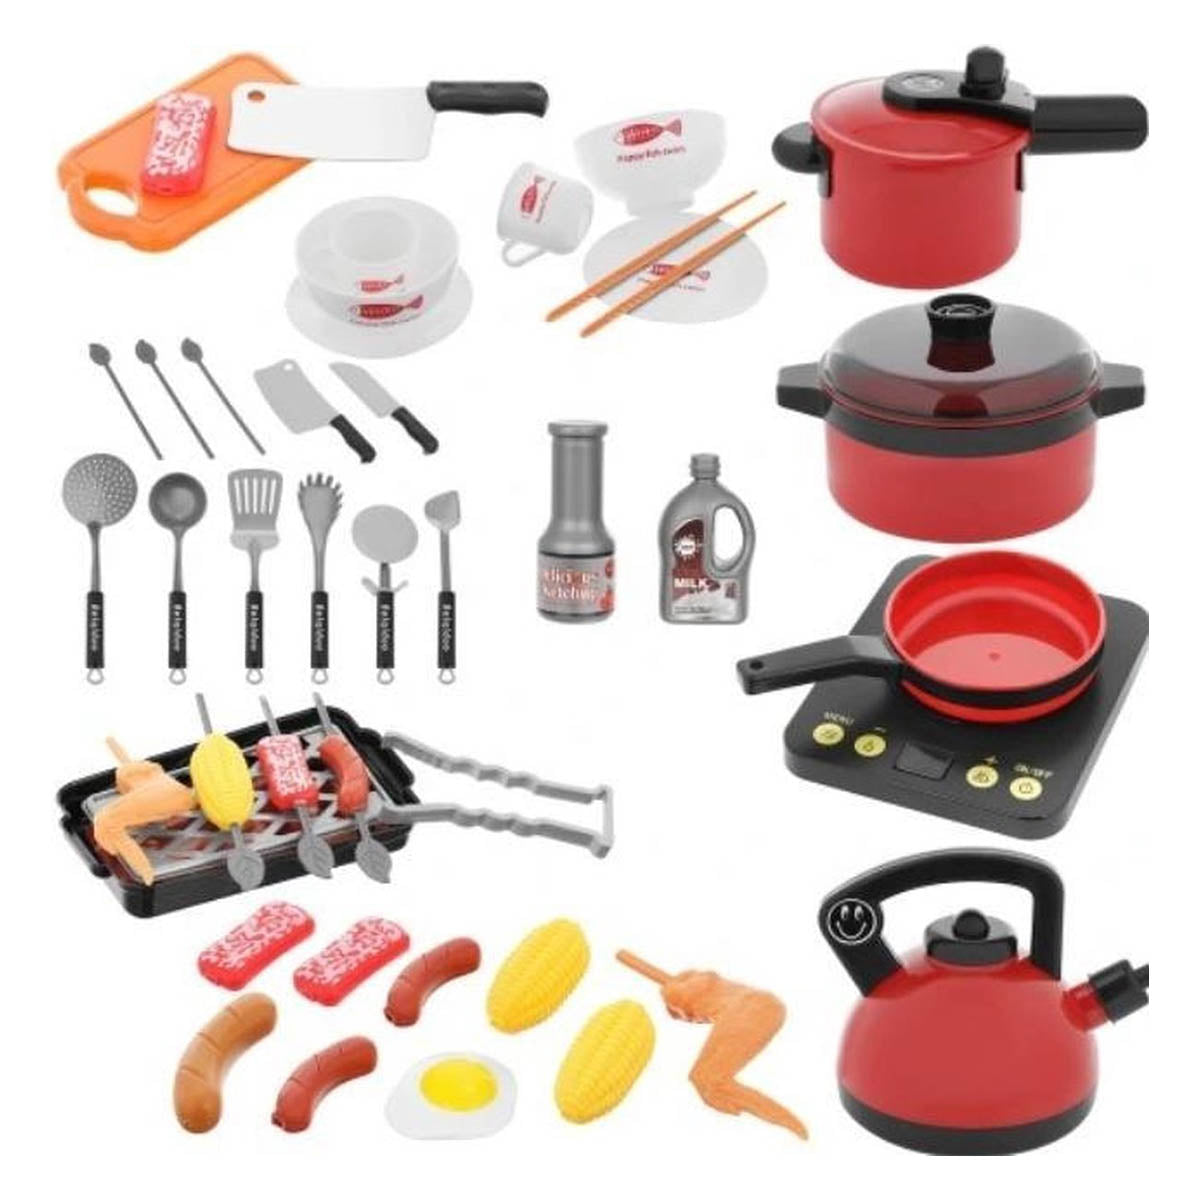 <tc>Ariko</tc> Toy kitchen accessory set | 44- piece | Kitchen utensils with kitchen supplies | Food items | Hob | whistling kettle | Cutting board | Includes 3 x Philips AA batteries